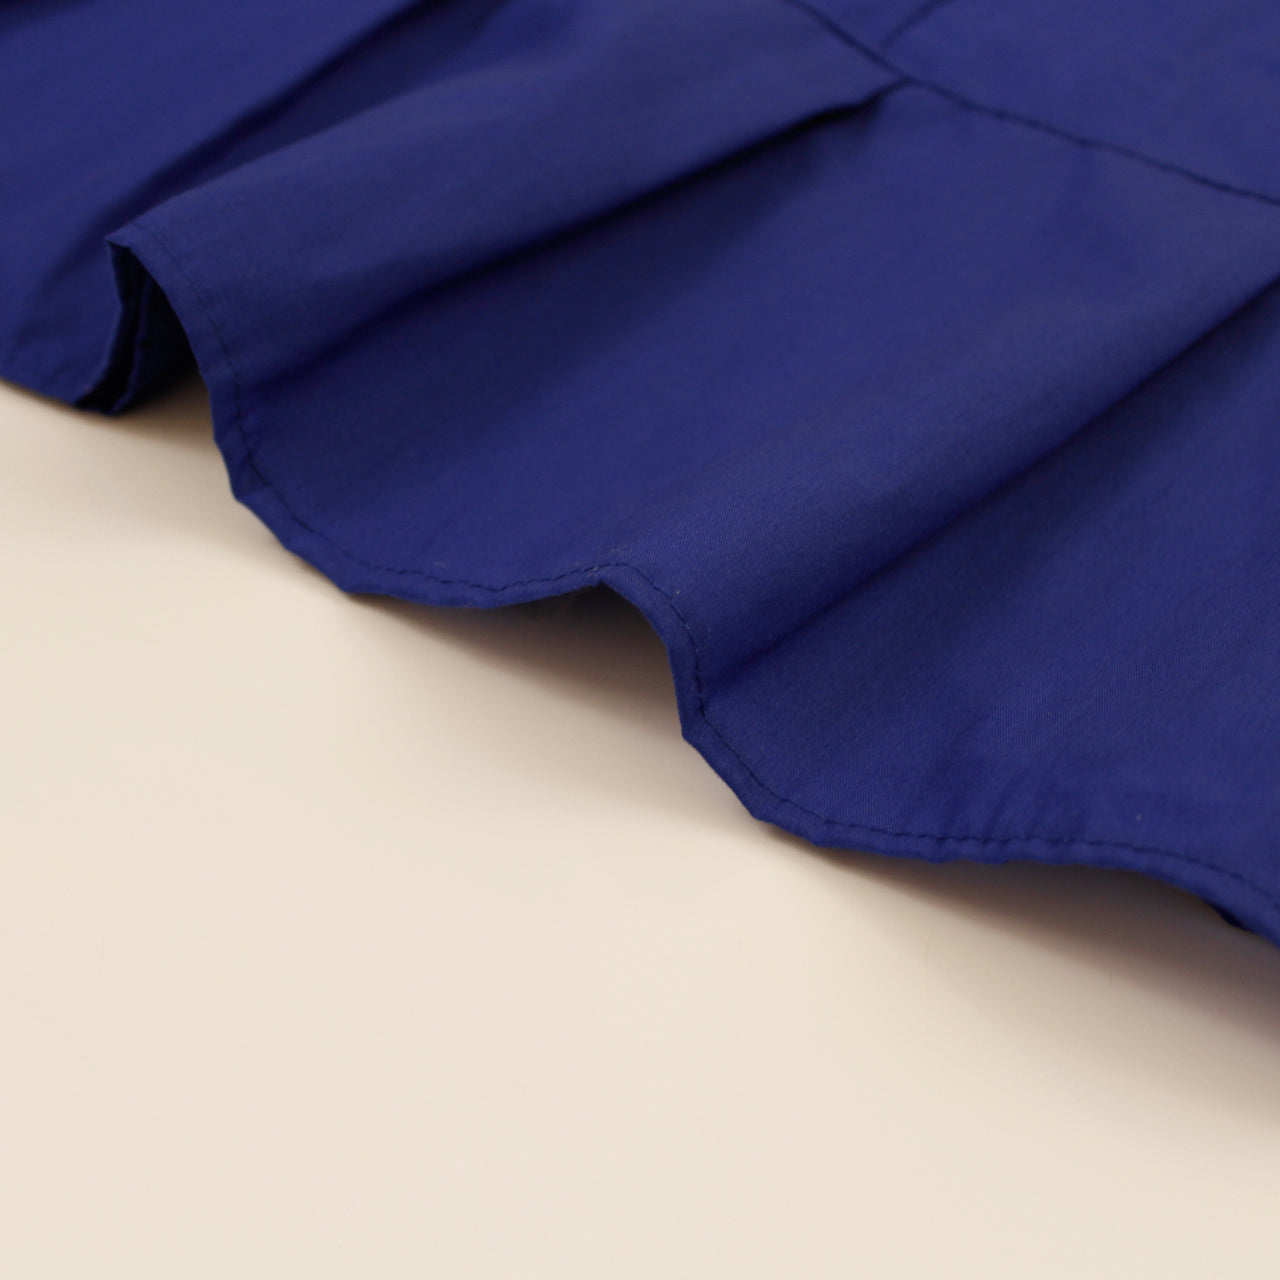 Royal Blue - Sari (Saree) Petticoat - Available in S, M, L & XL - Underskirts For Sari's